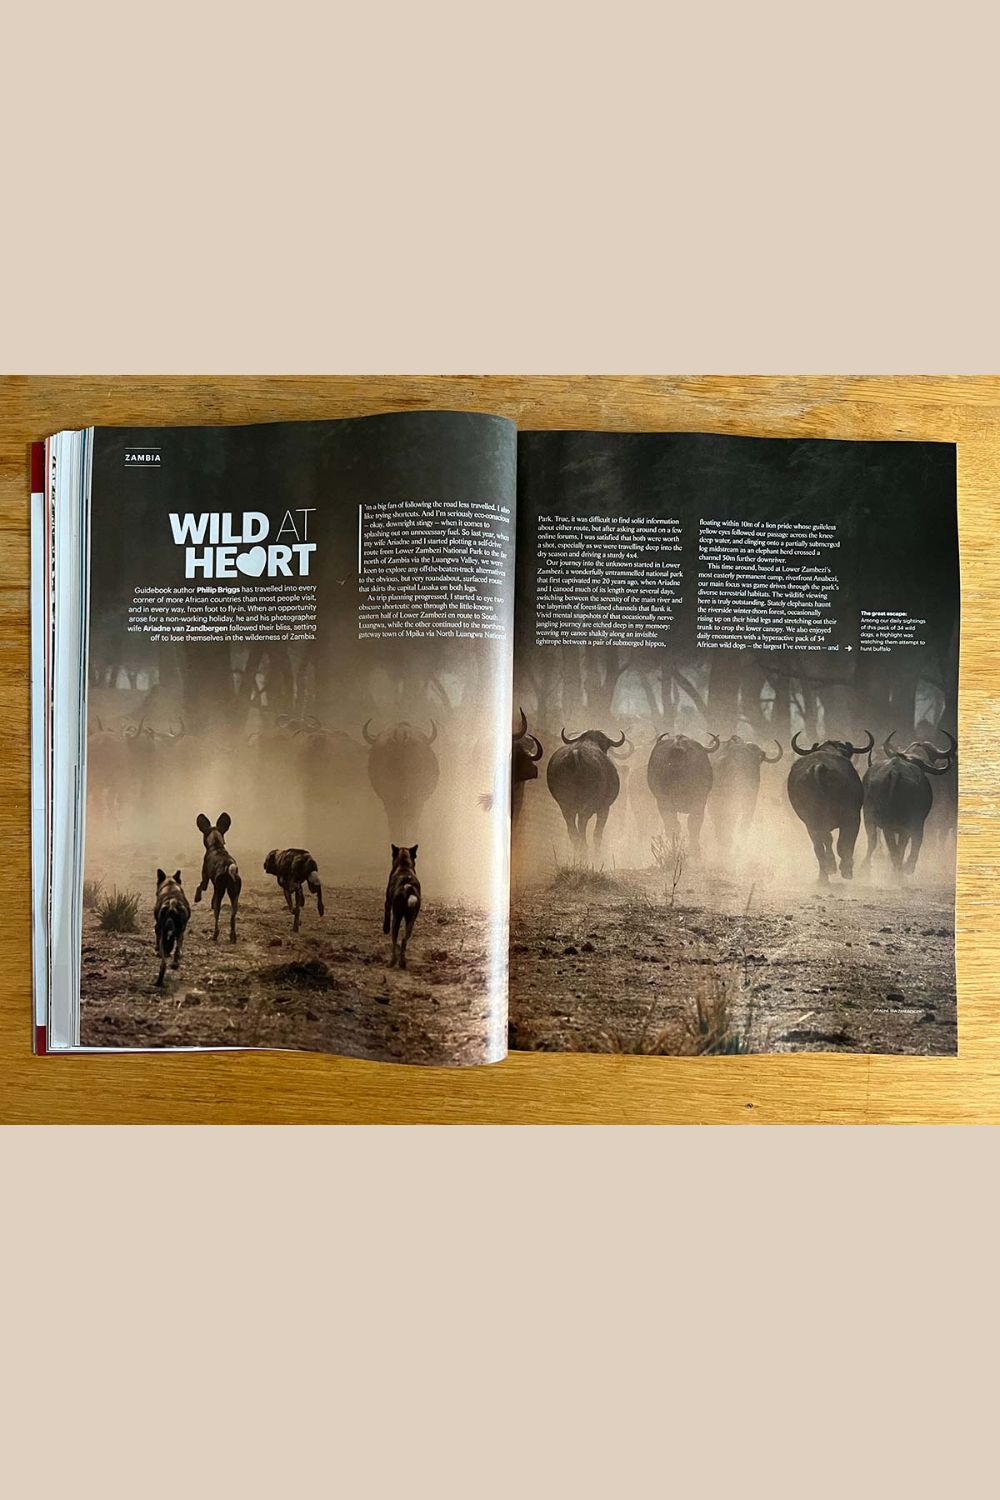 Travel Africa Issue 98